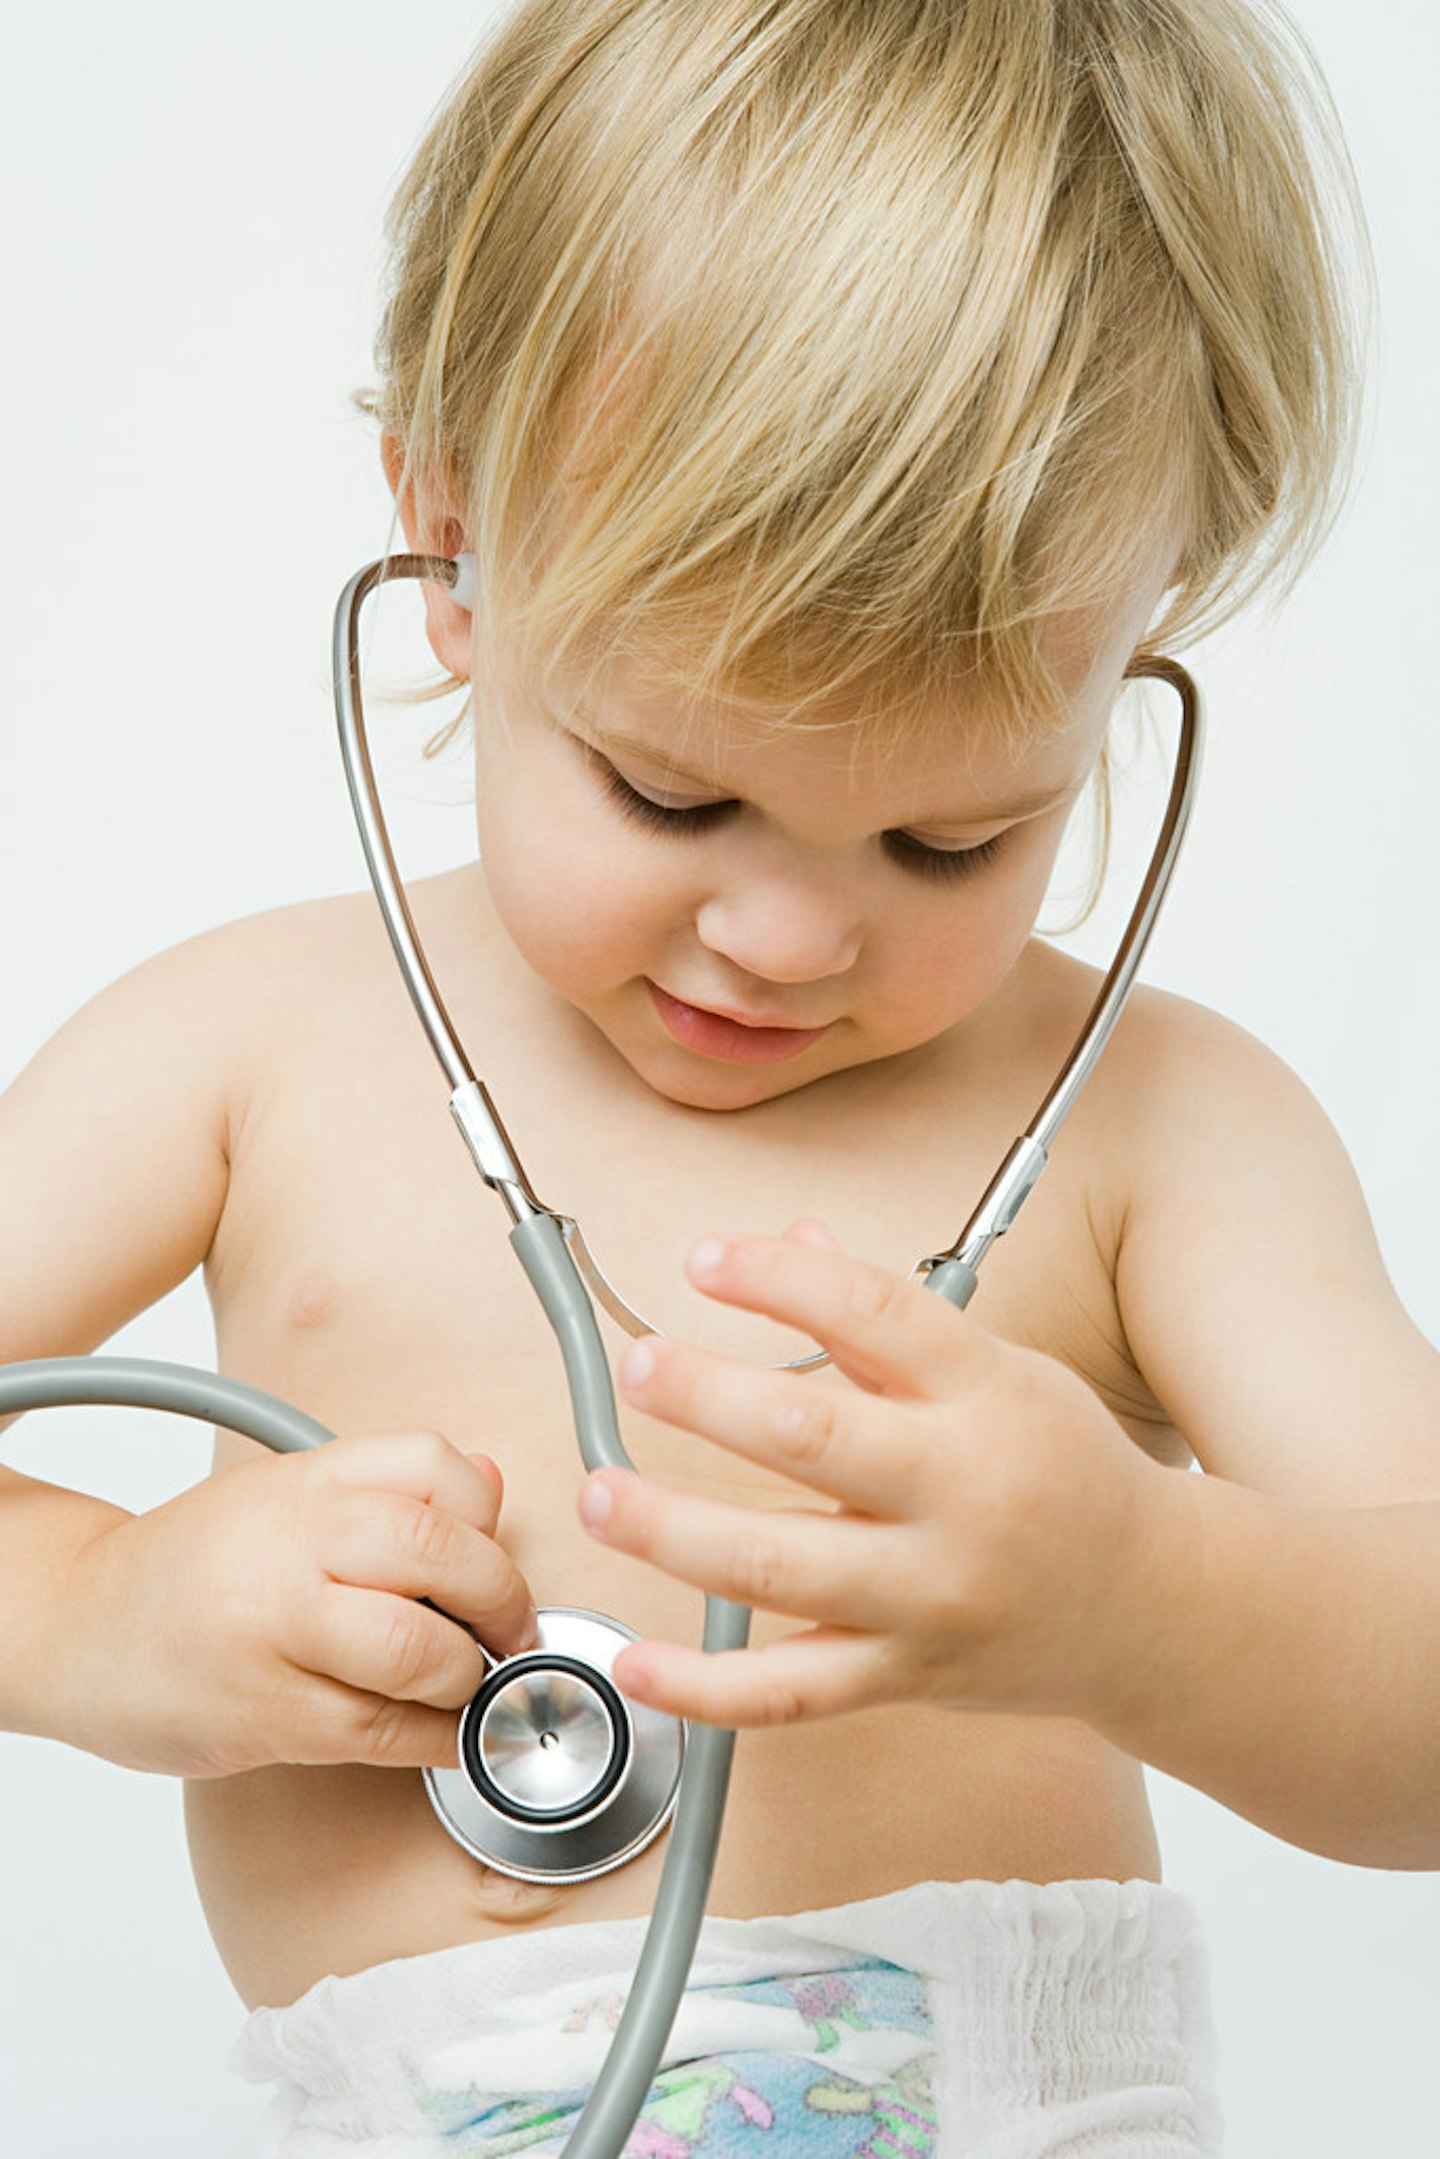 Toddler chest infections